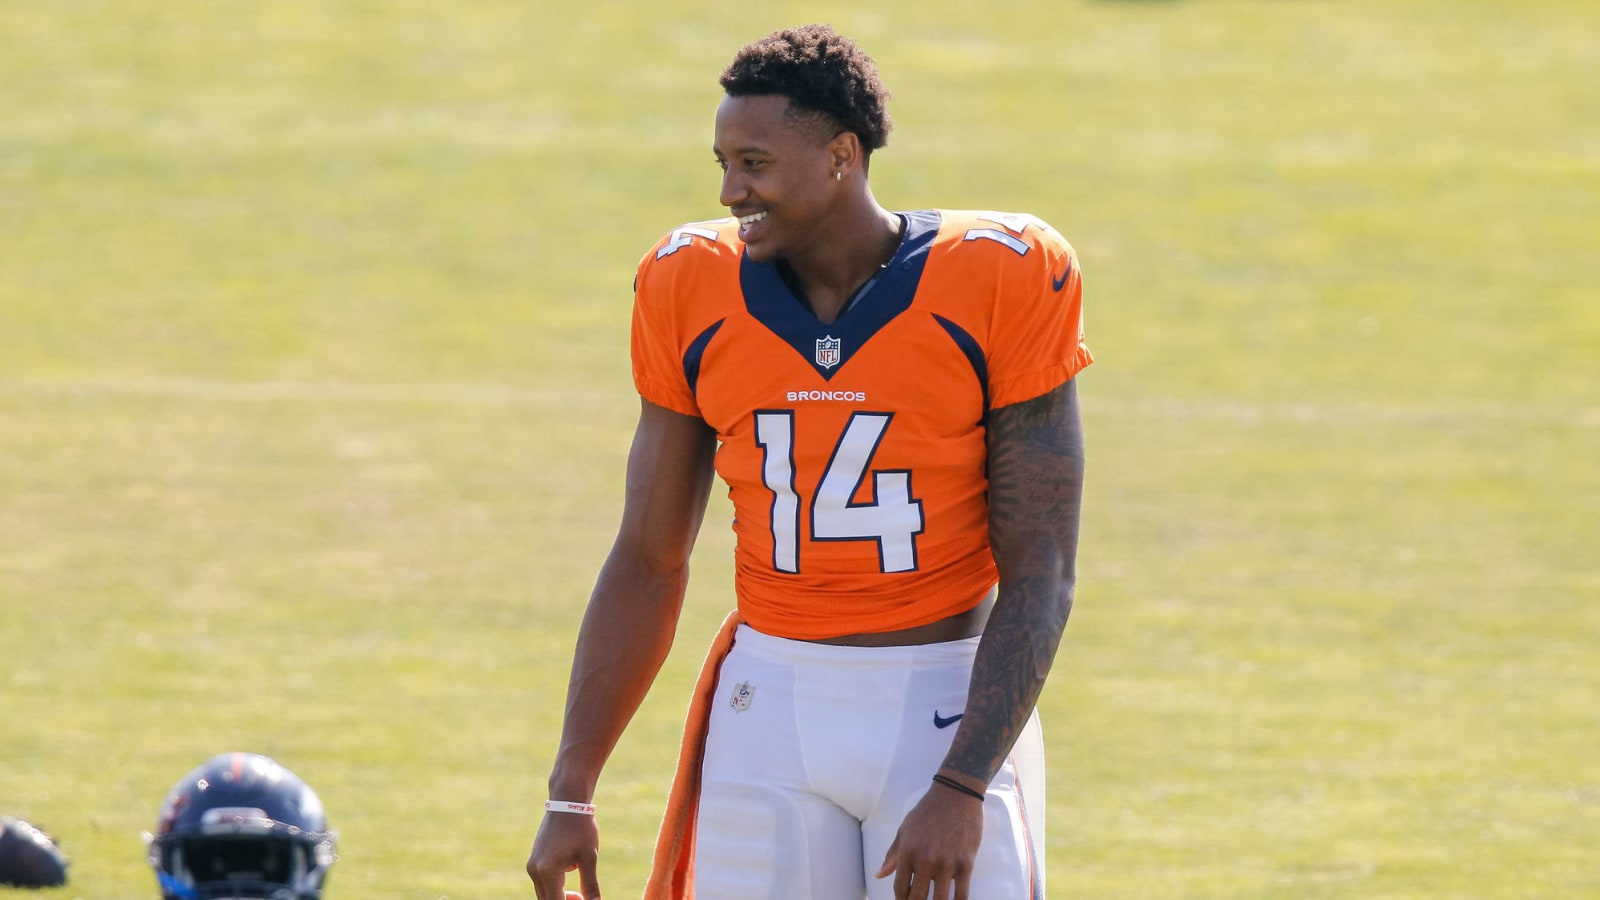 Broncos' Sutton: Knee 'feels really good' after ACL injury